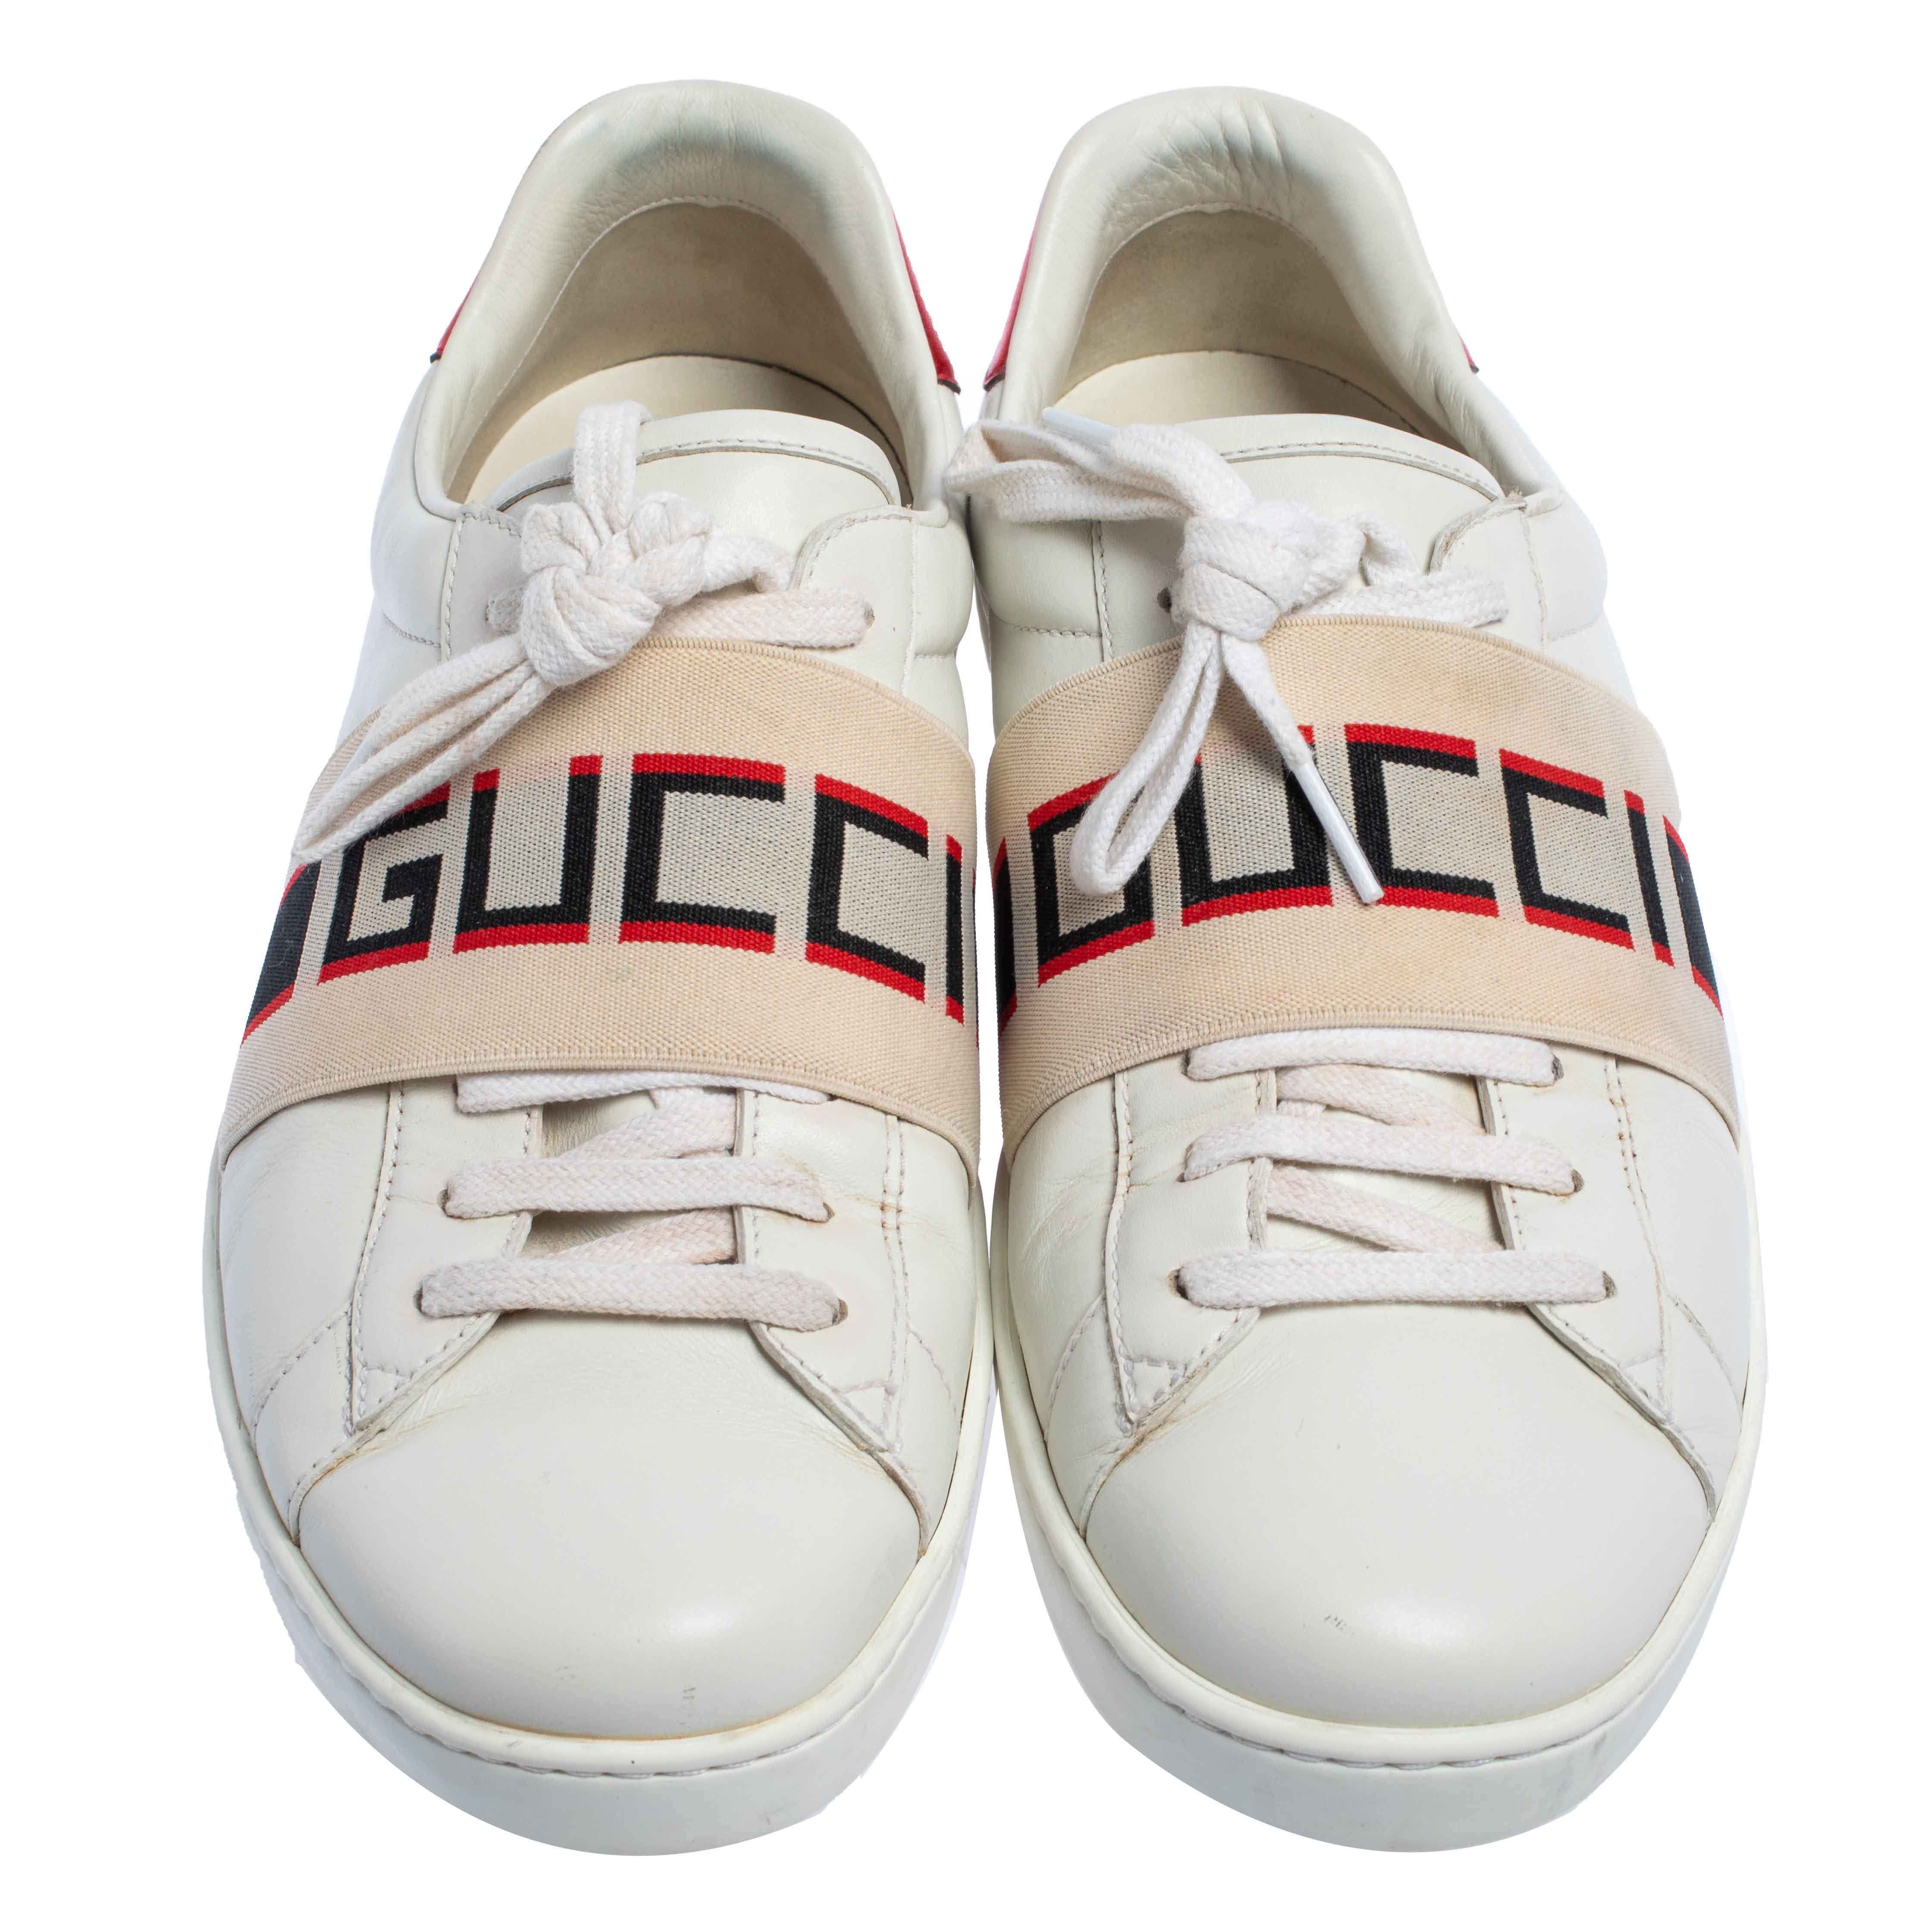 Stacked with signature details, this Gucci pair is rendered in white and red leather and is designed in a low-cut style with lace-ups. The sneakers have been fashioned with 'GUCCI' bands on the vamps. Complete with red trims carrying the brand label